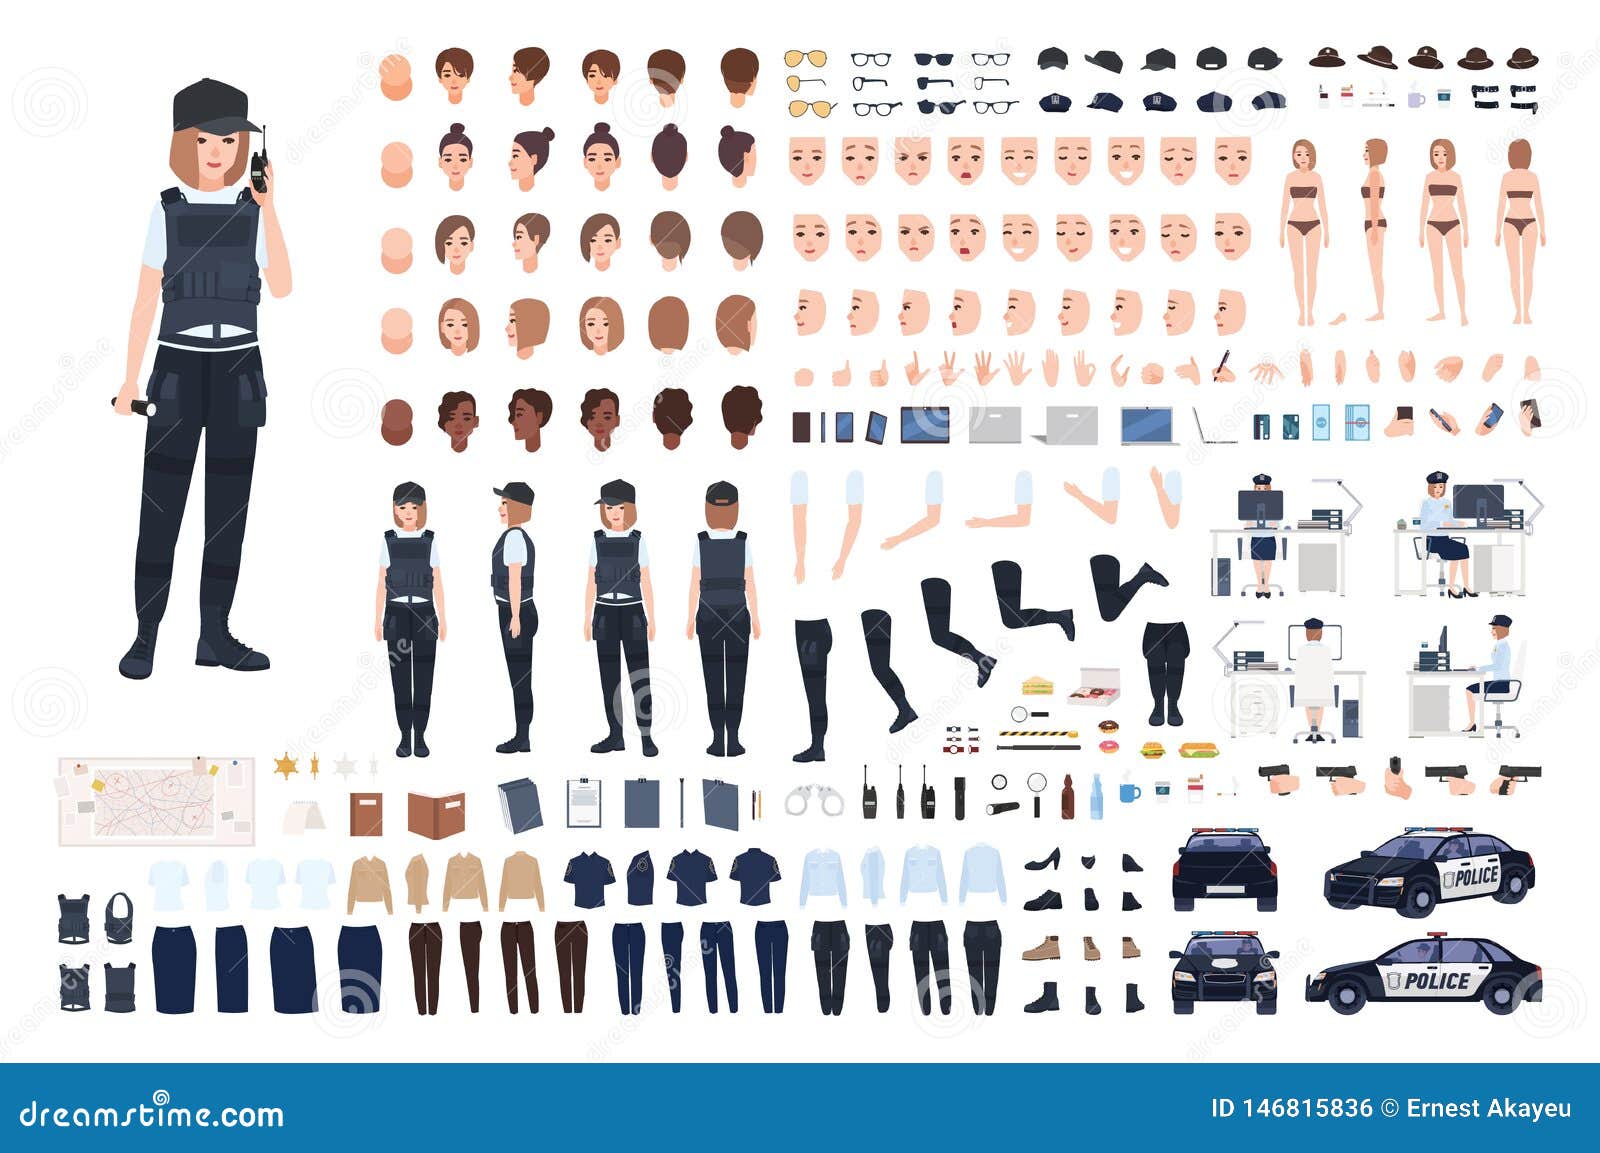 Policewoman Animation Set or DIY Kit. Bundle of Female Police Officer Body  Parts, Faces, Hairstyles, Uniform, Clothing Stock Vector - Illustration of  element, design: 146815836